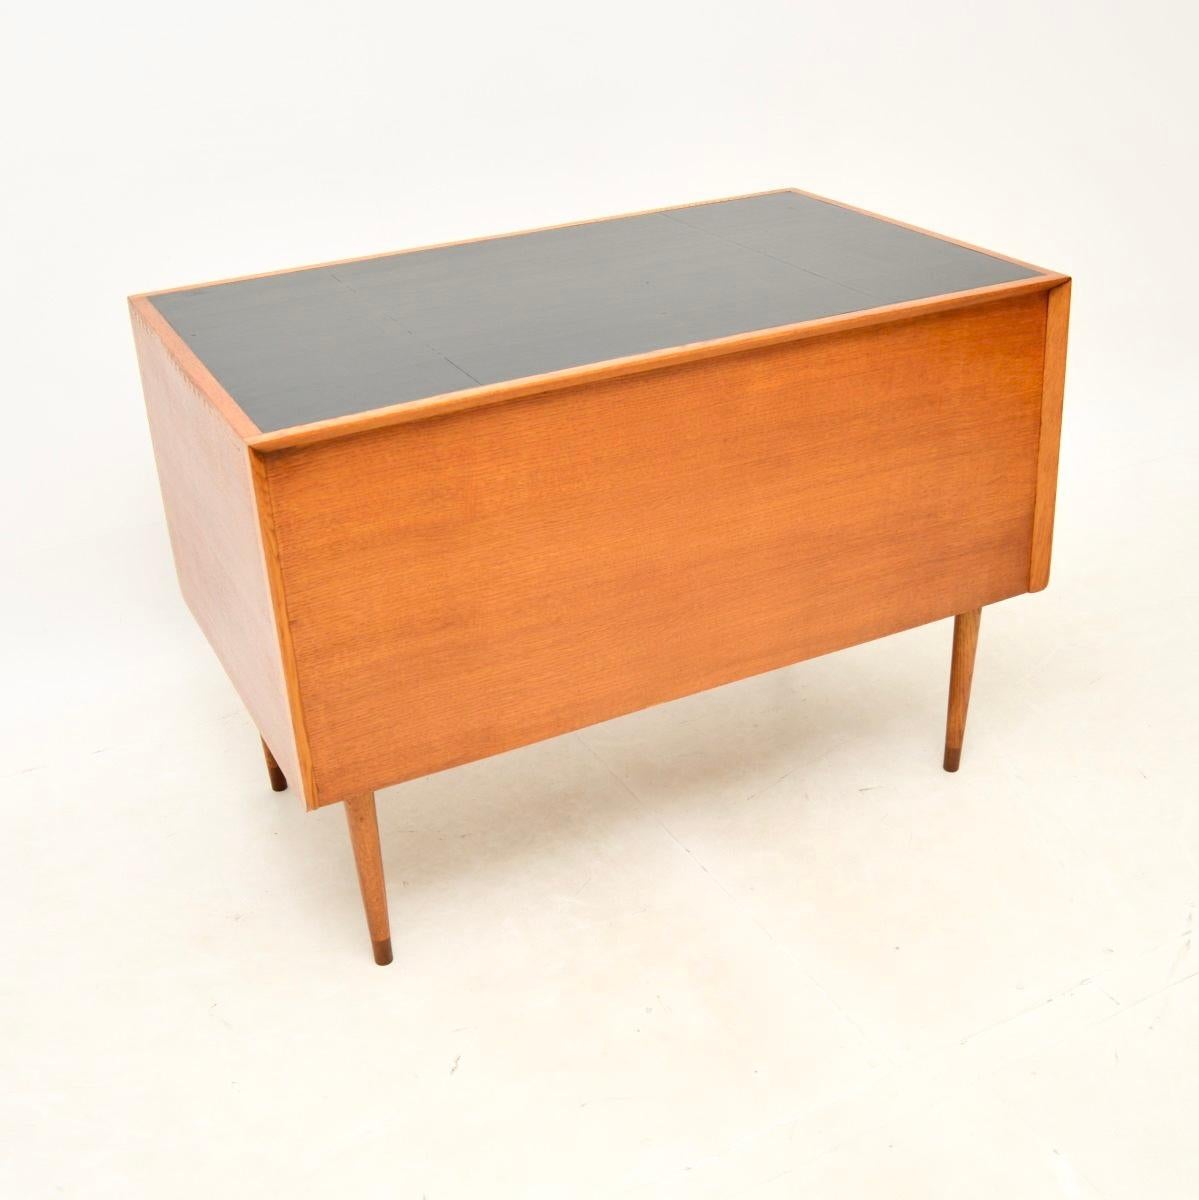 Mid-20th Century Vintage Walnut and Oak Leather Top Desk For Sale